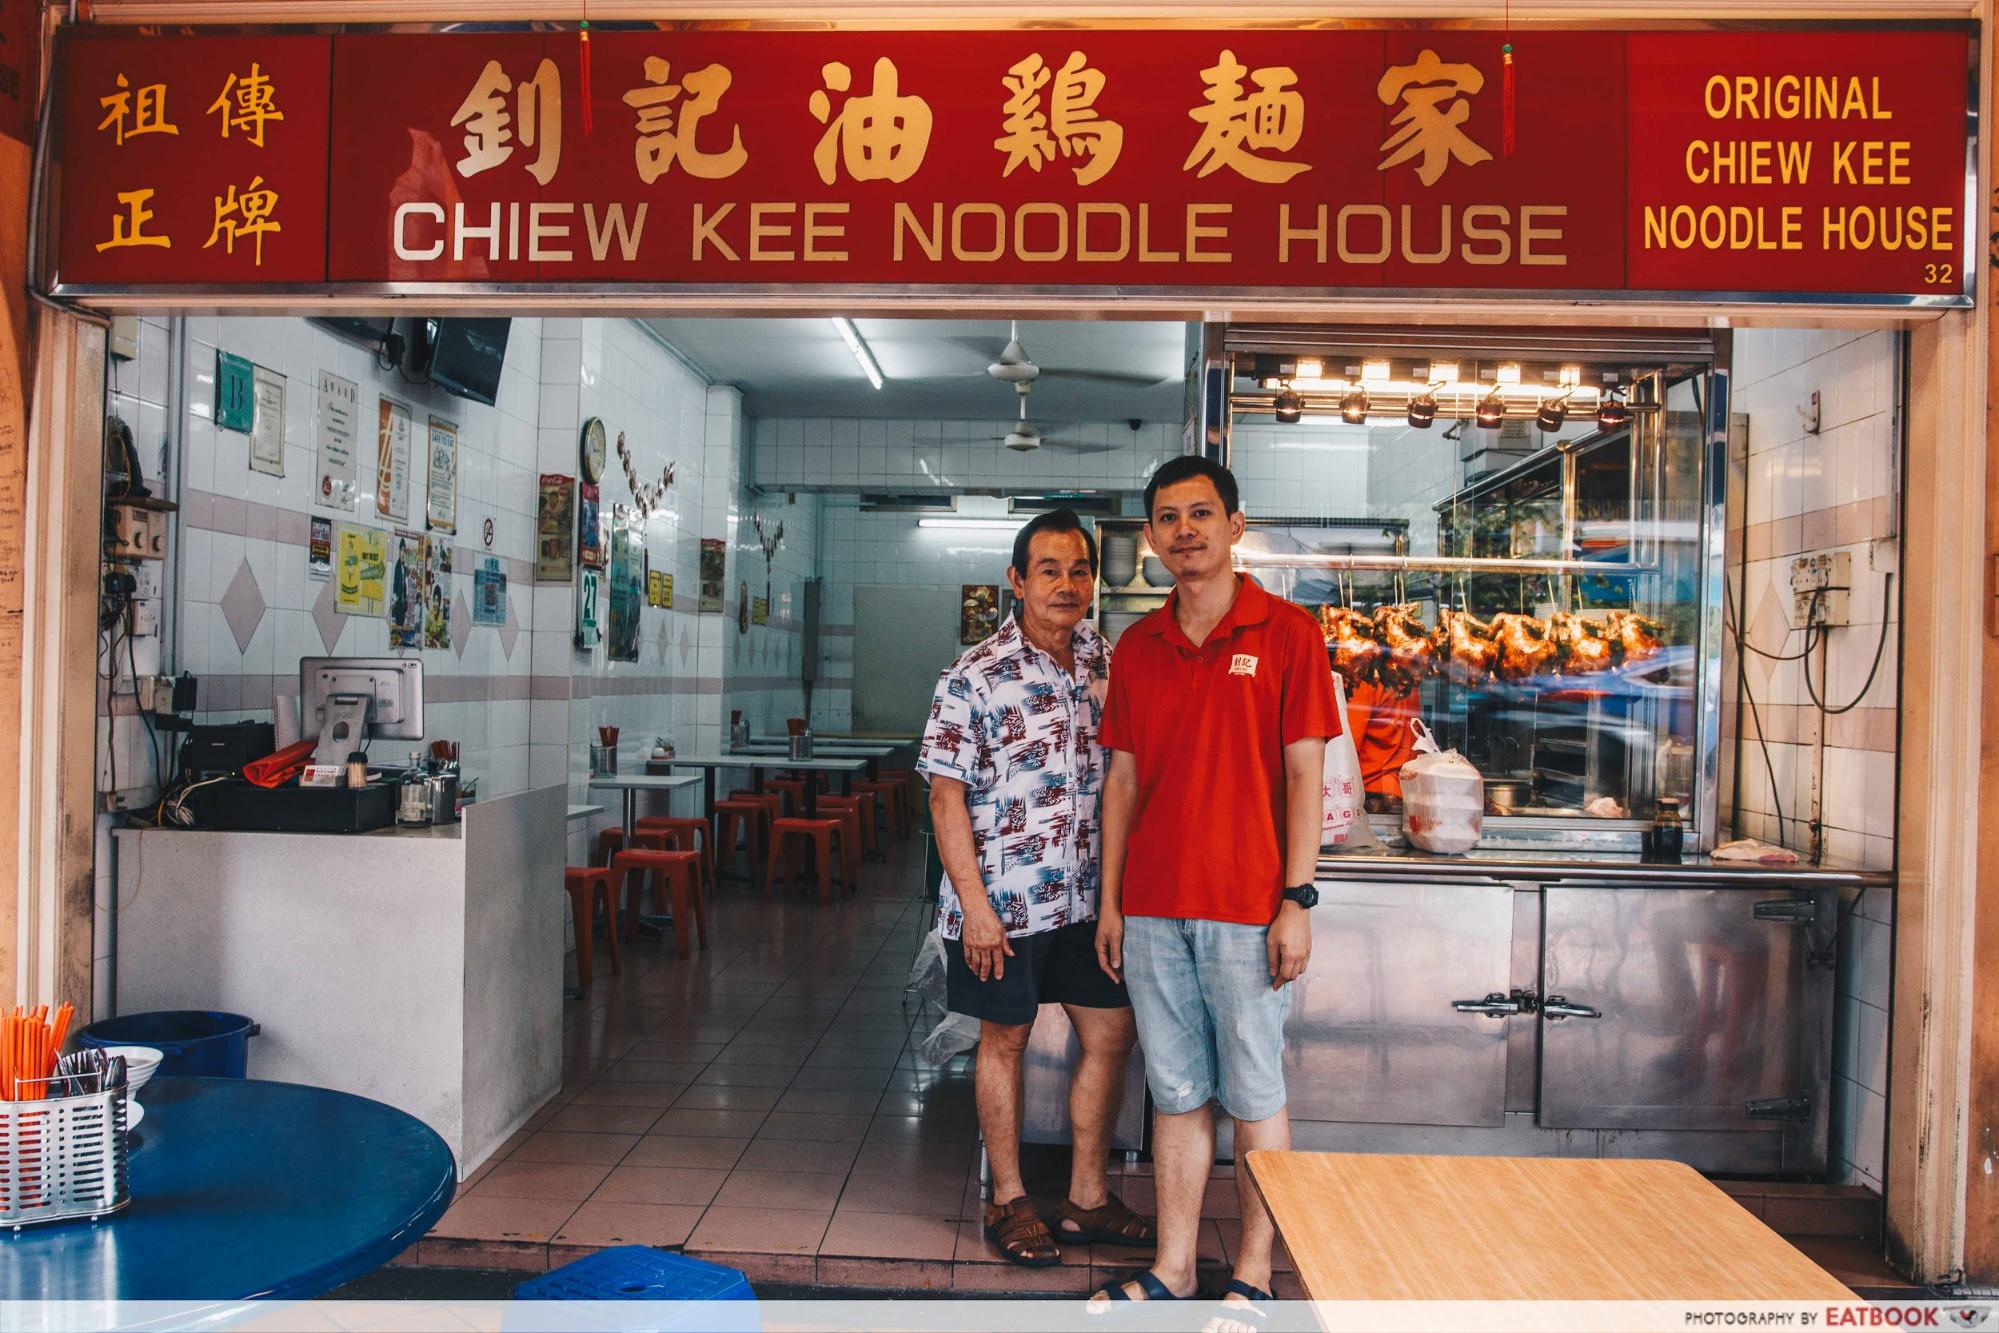 Battle of Chew Kee and Chiew Kee - Chiew Kee storefront